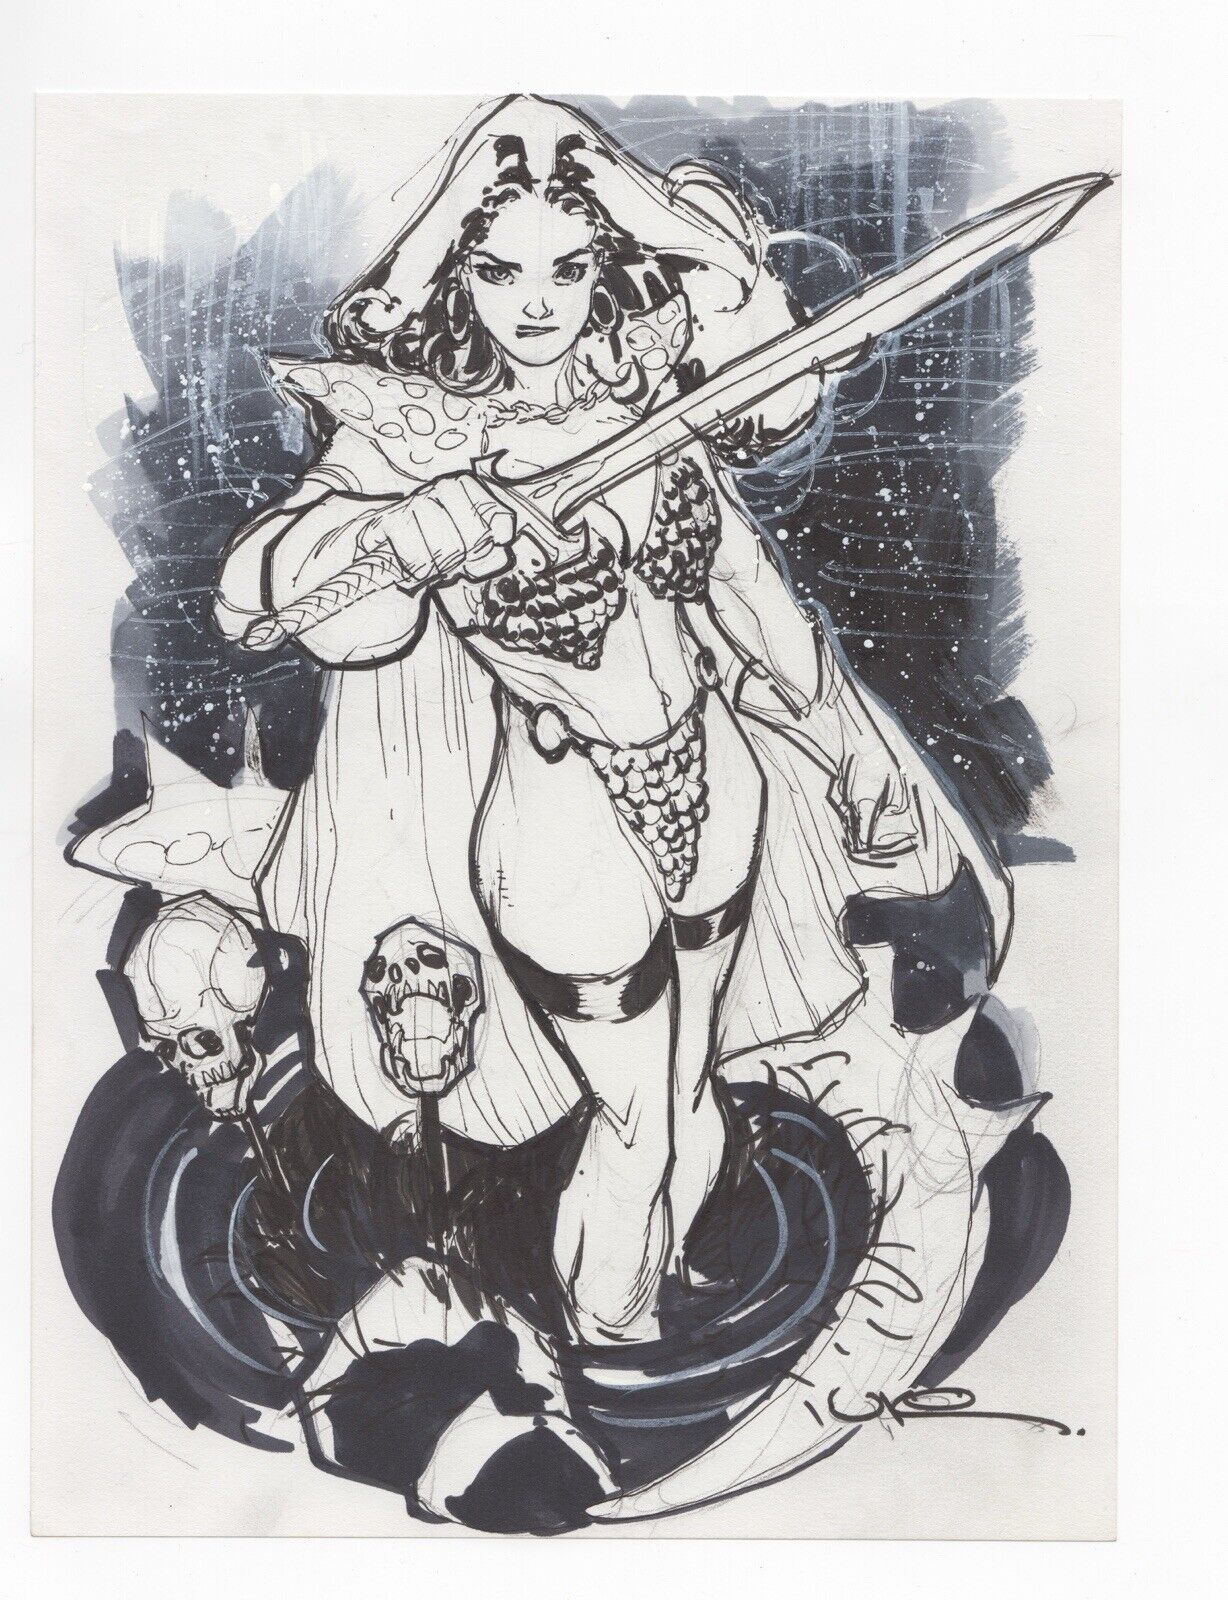 Signed Original Art Uko Smith Red Sonja Watercolor/Wash Commission